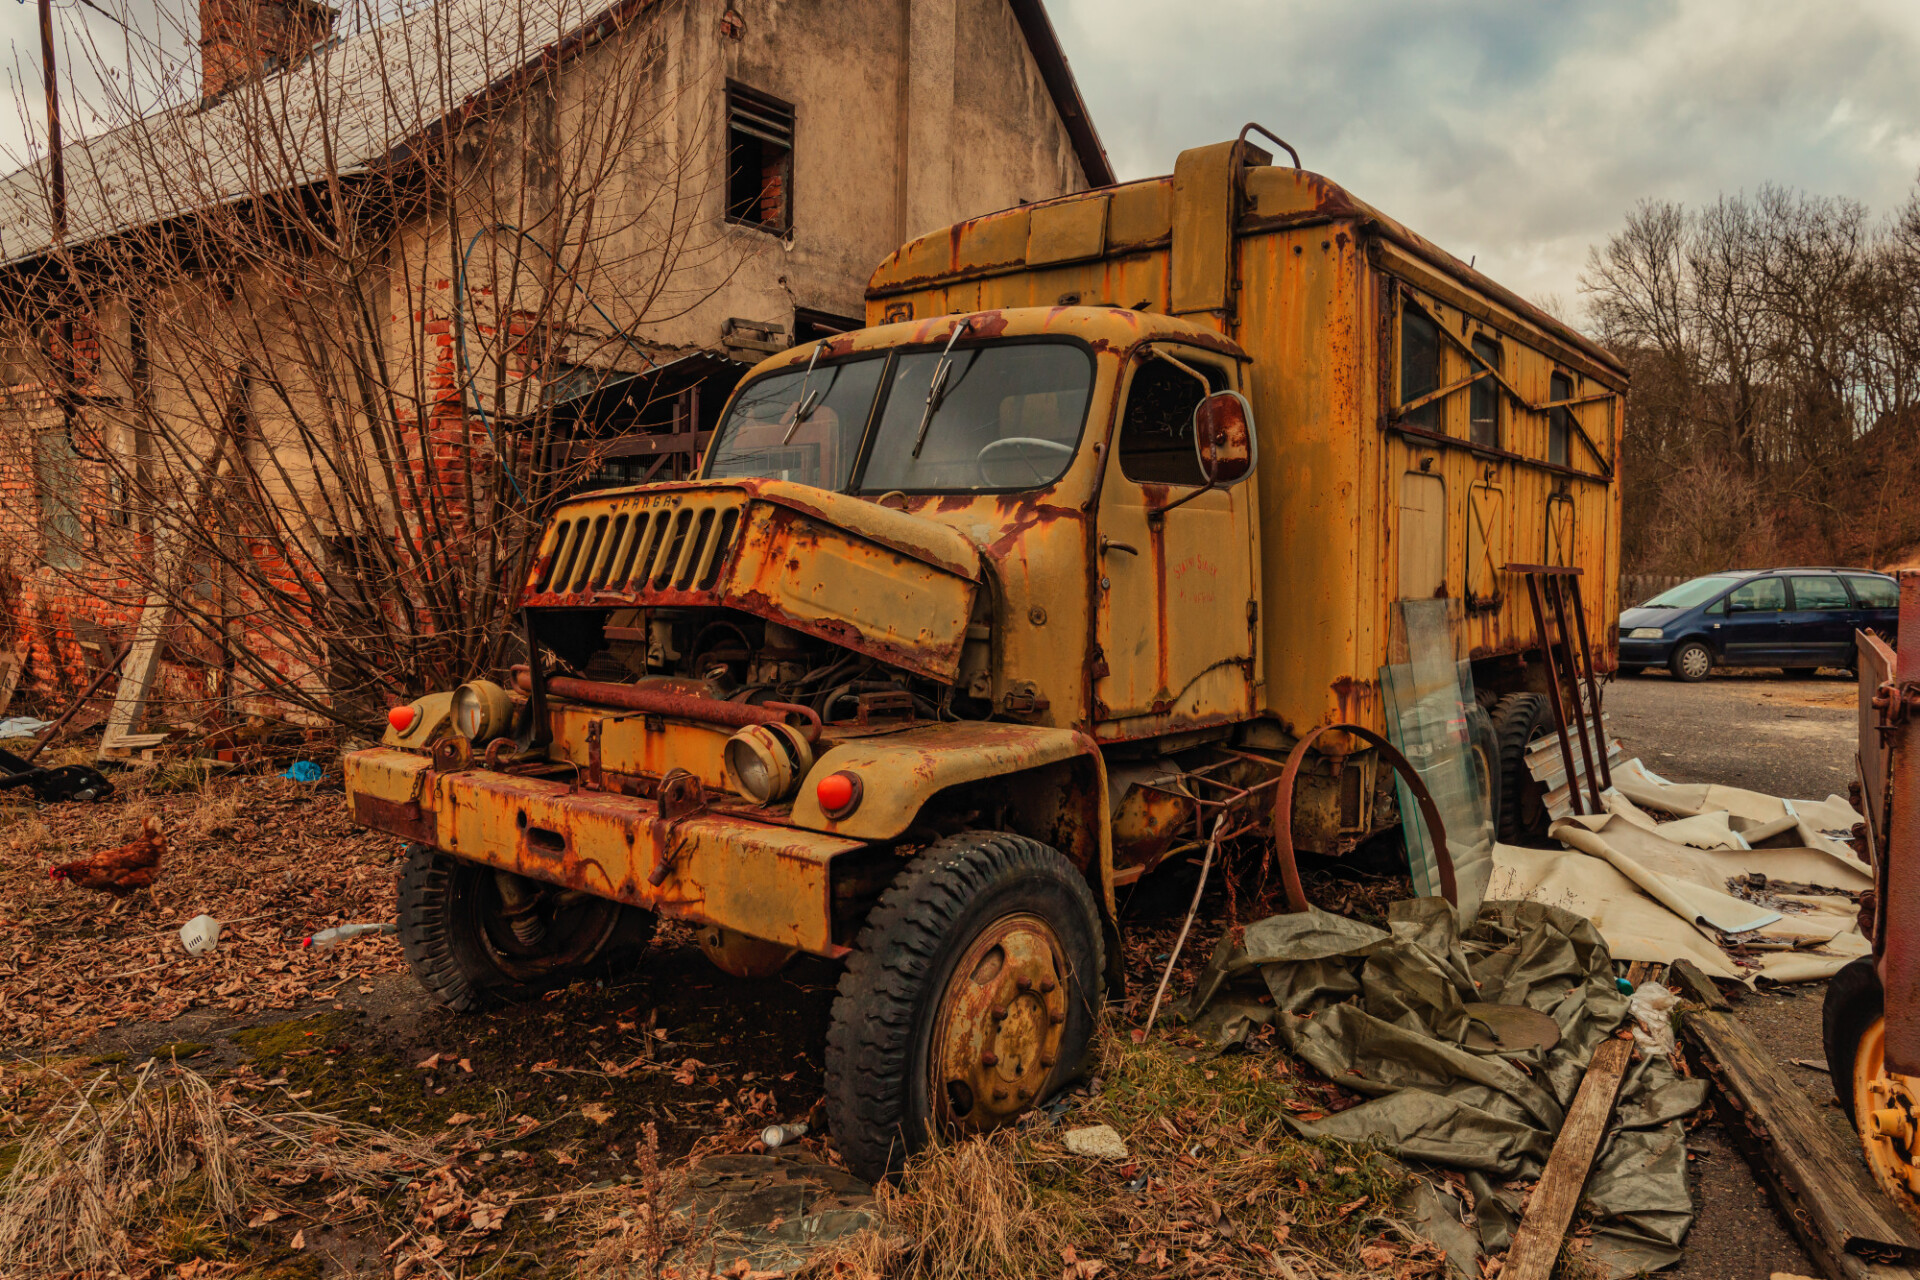 Wreck of a yellow old truck